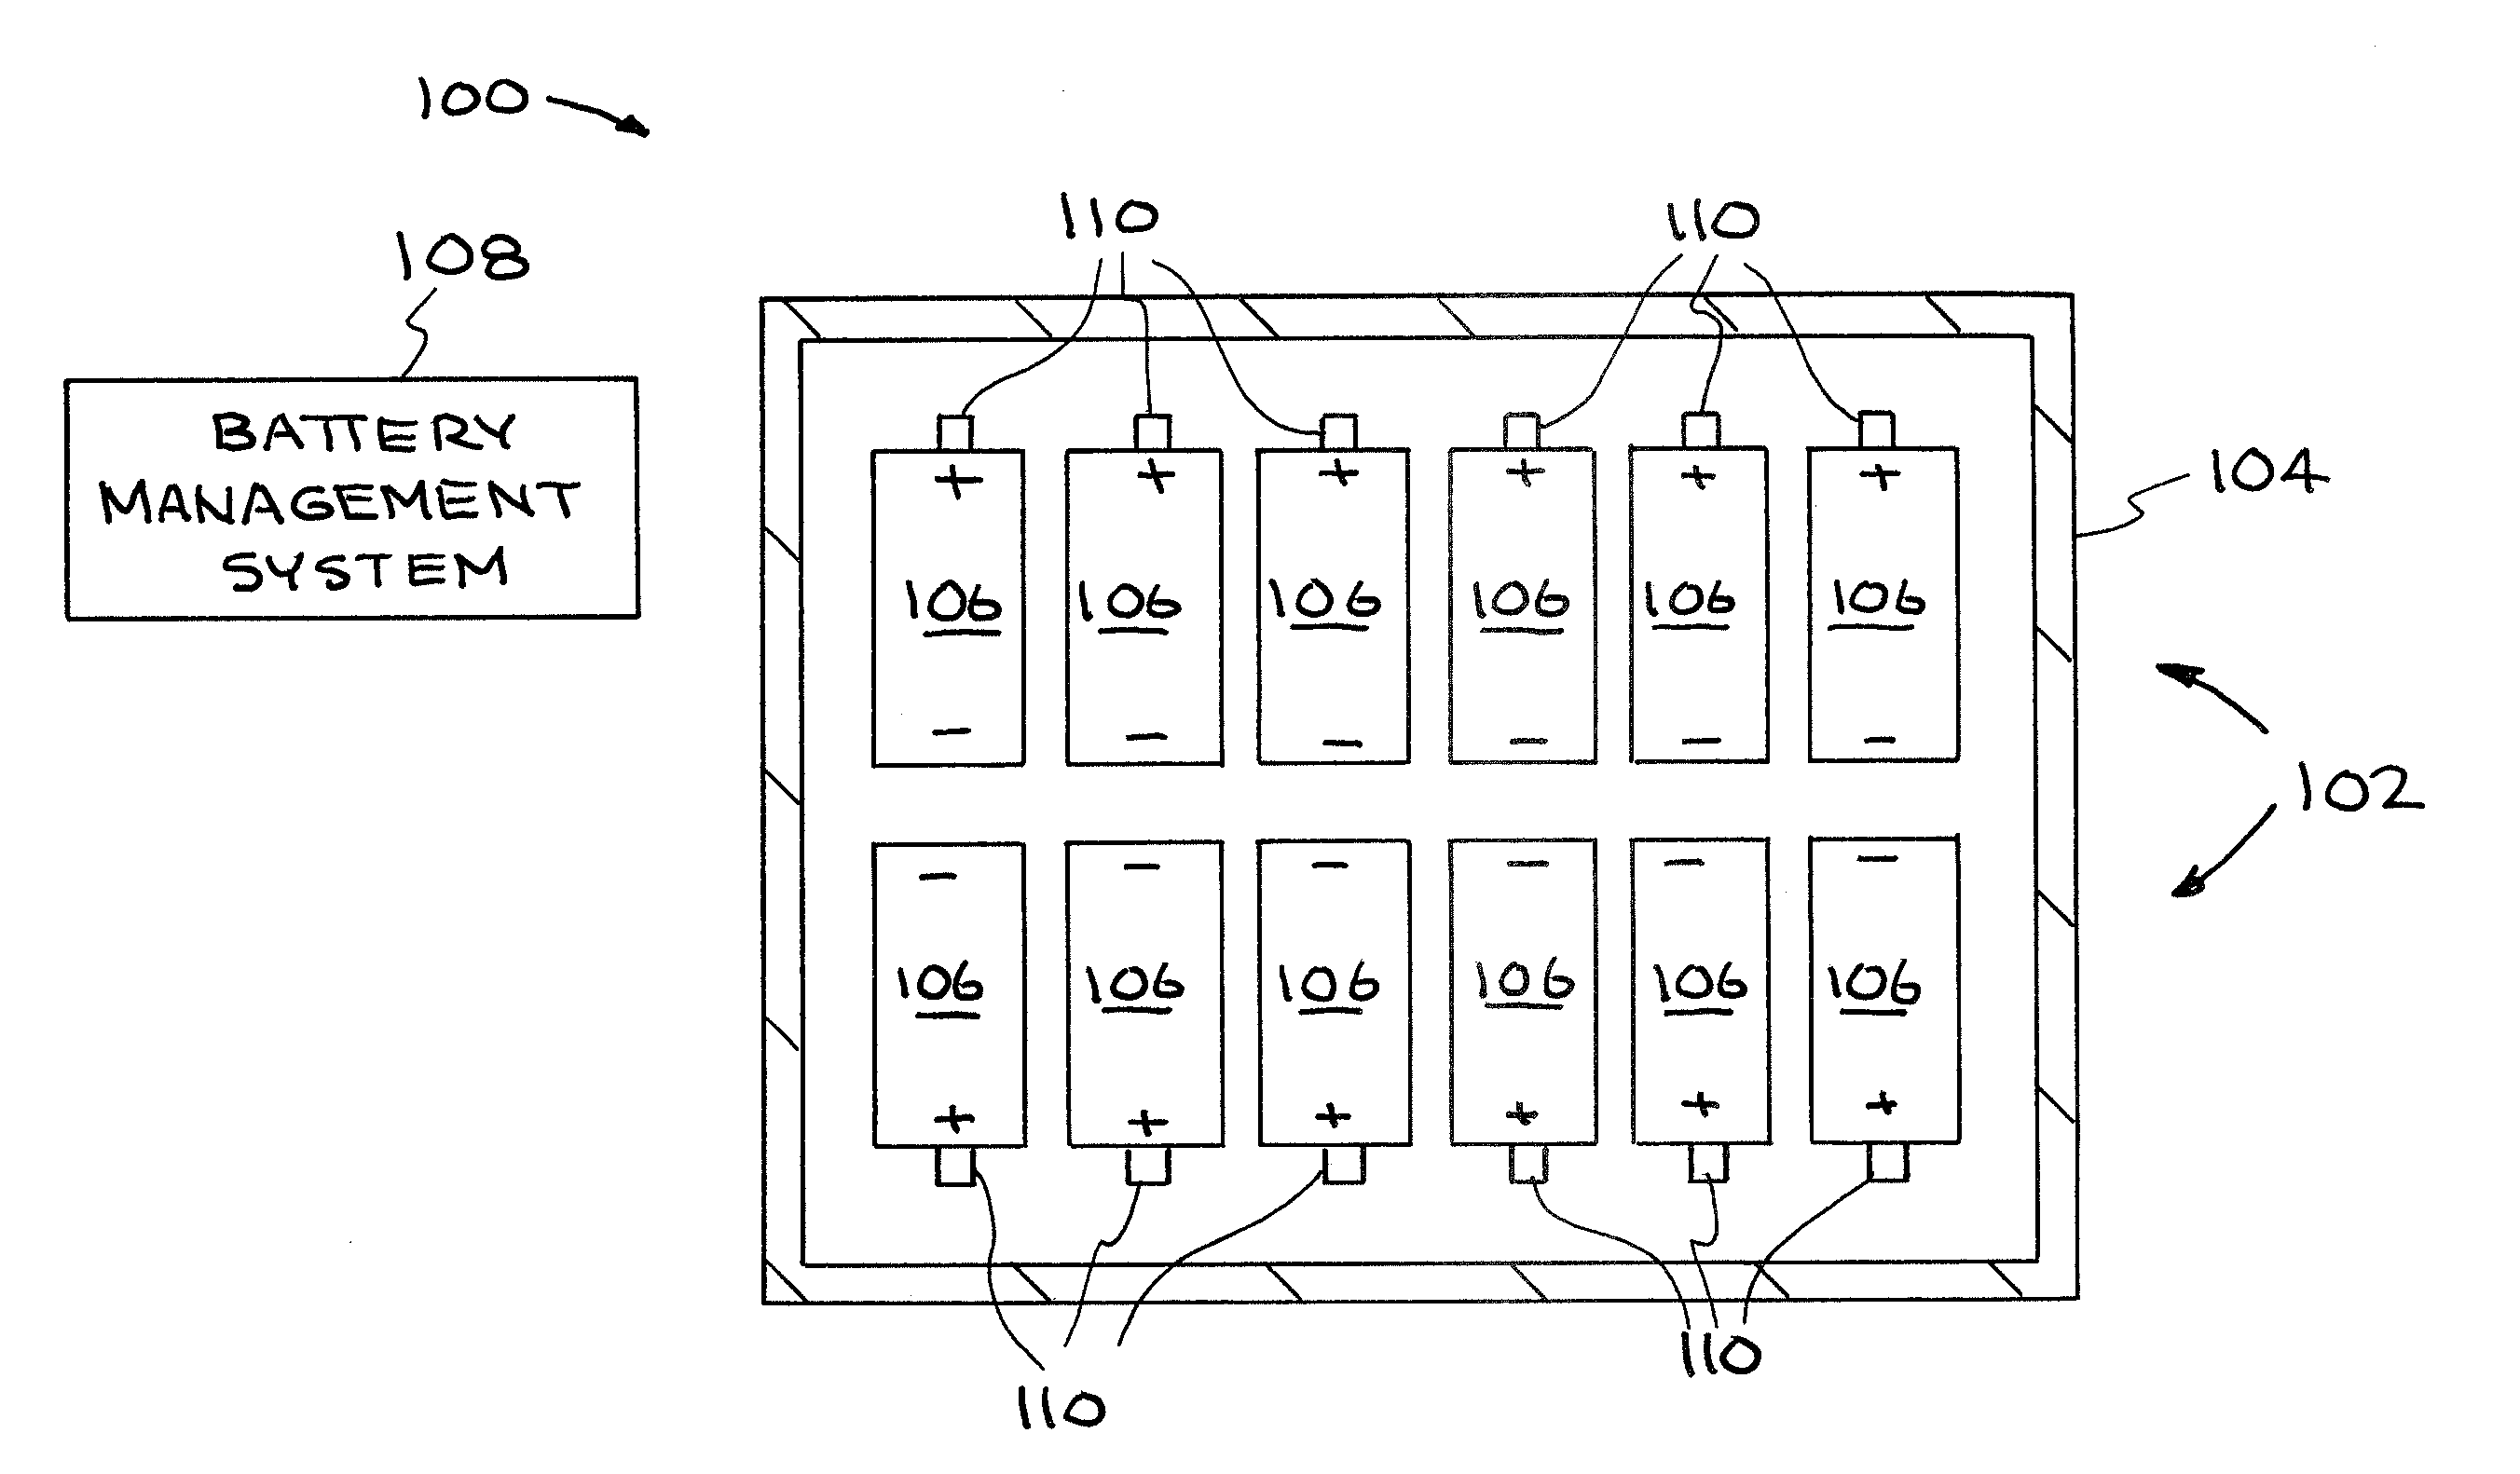 Battery management system with distributed wireless sensors